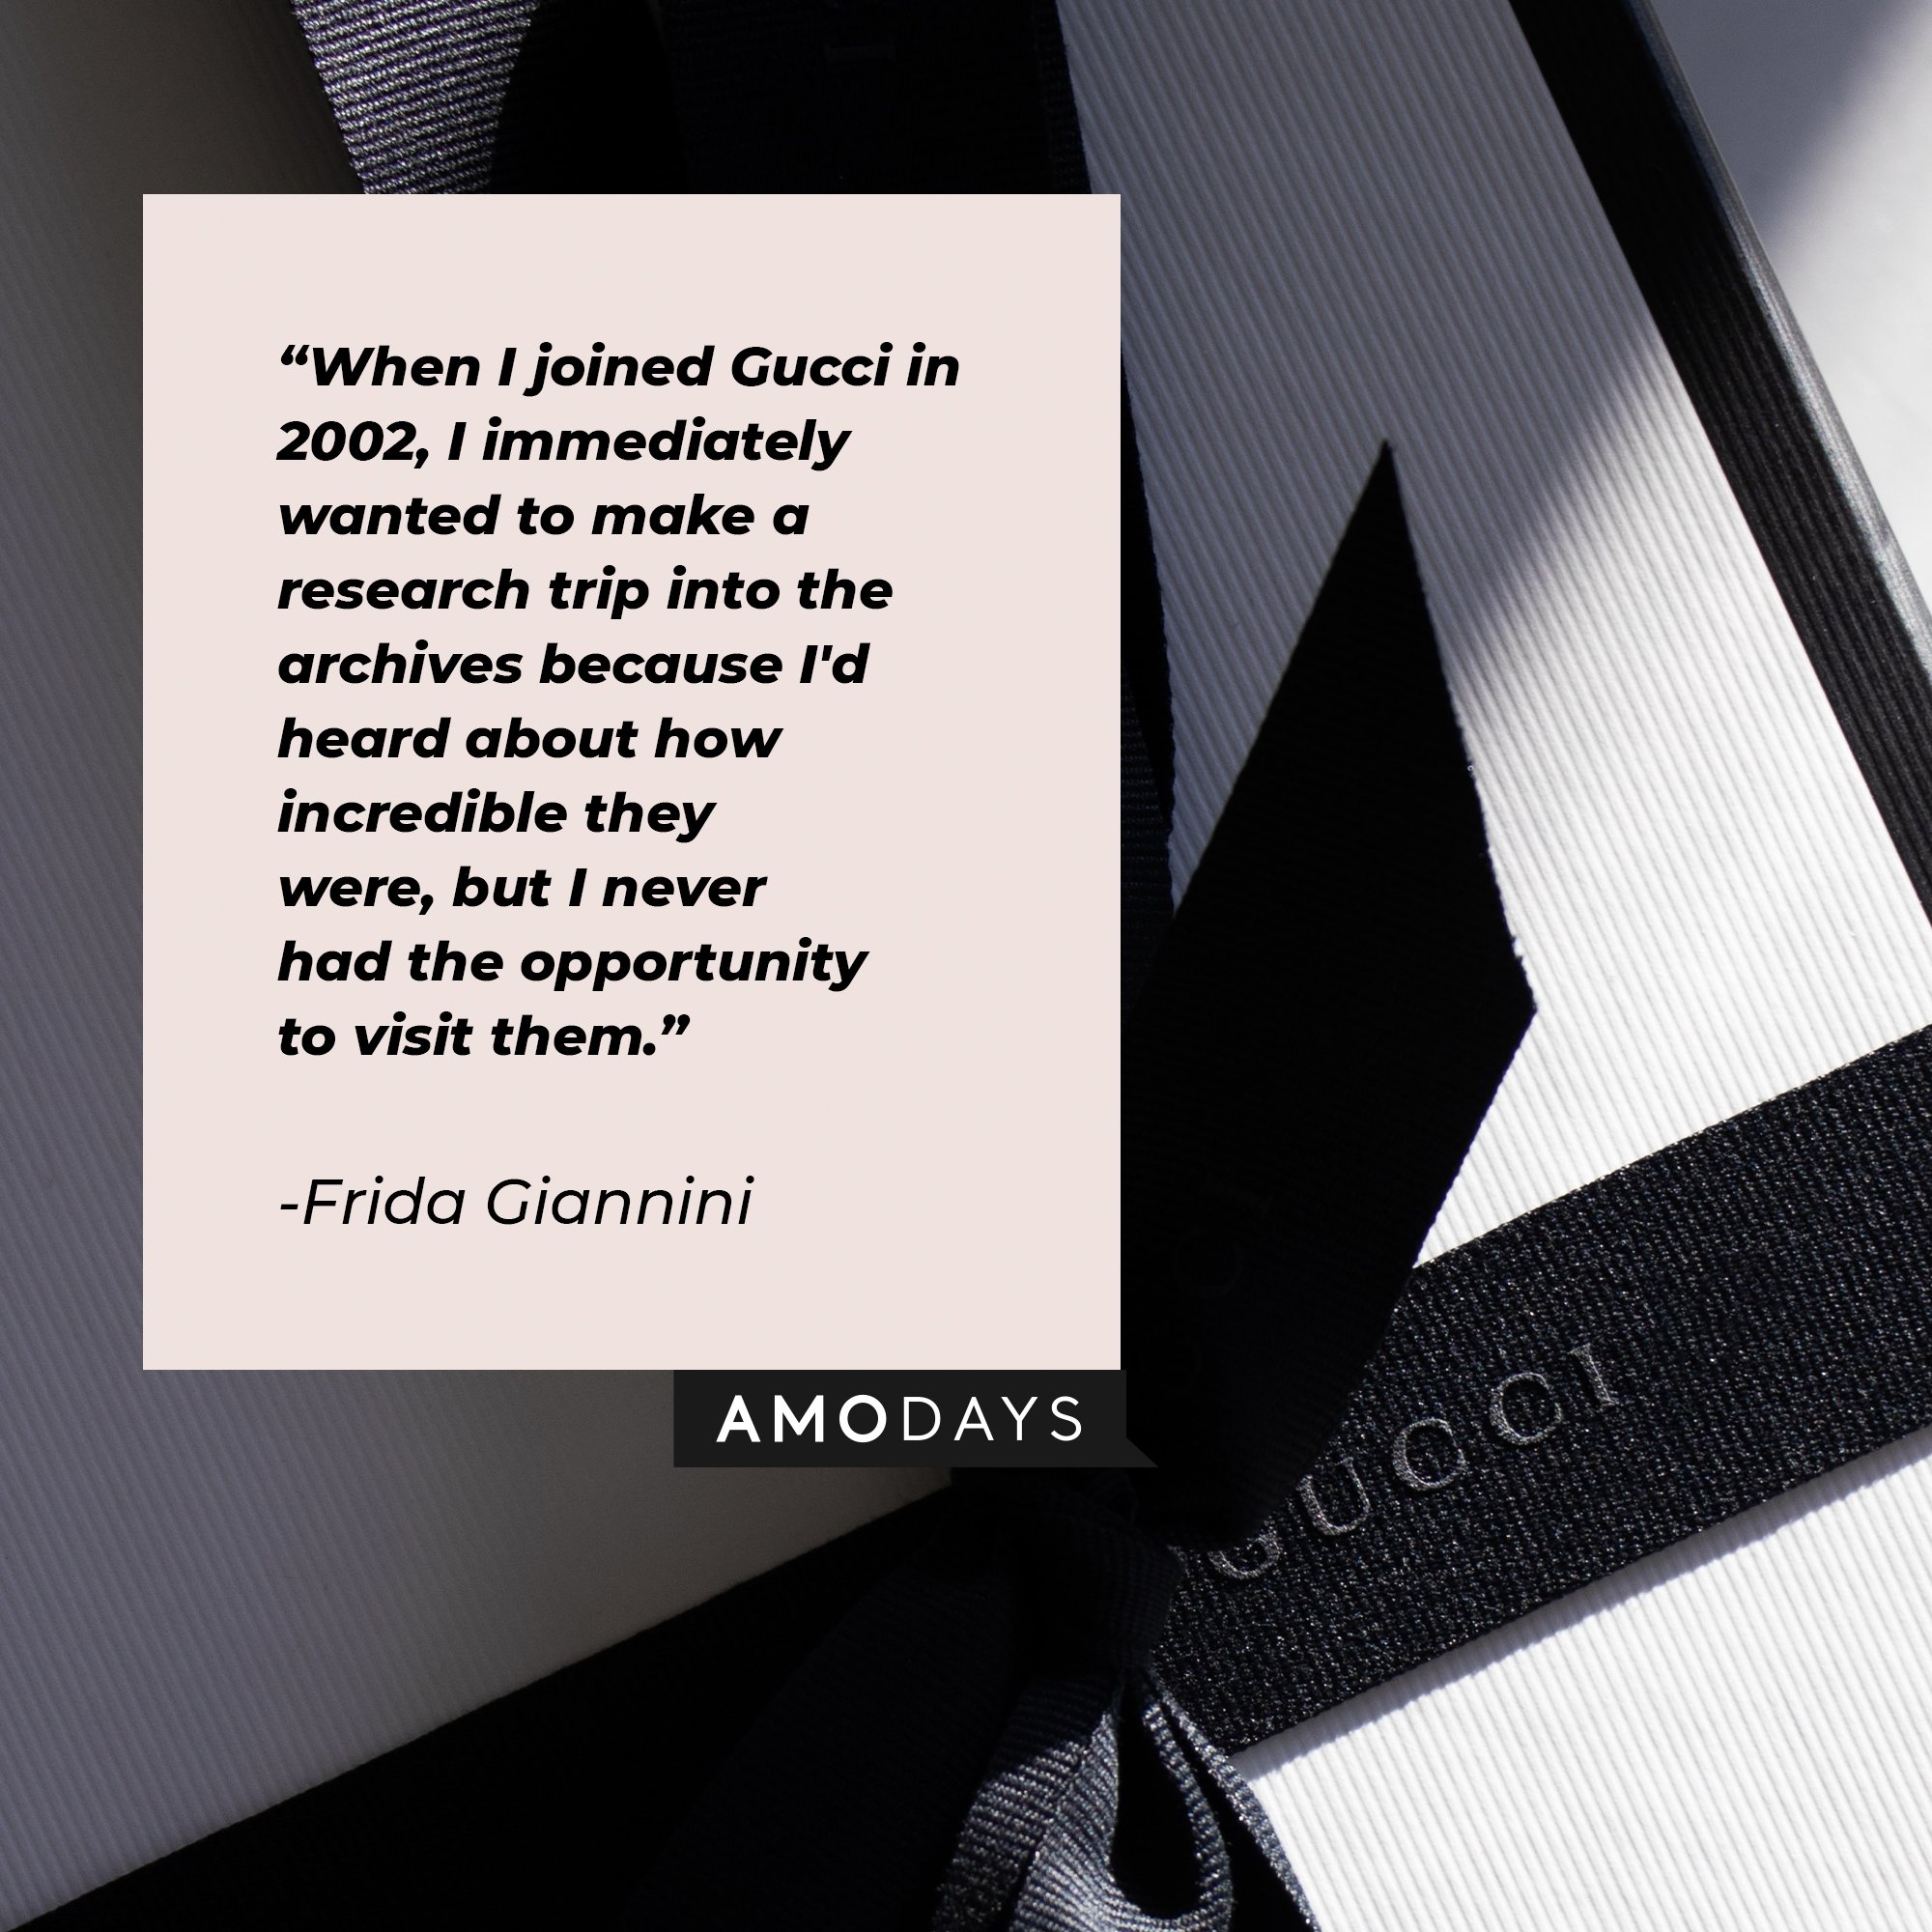 Frida Giannini's quote "When I joined Gucci in 2002, I immediately wanted to make a research trip into the archives because I'd heard about how incredible they were, but I never had the opportunity to visit them." | Source: Unsplash.com